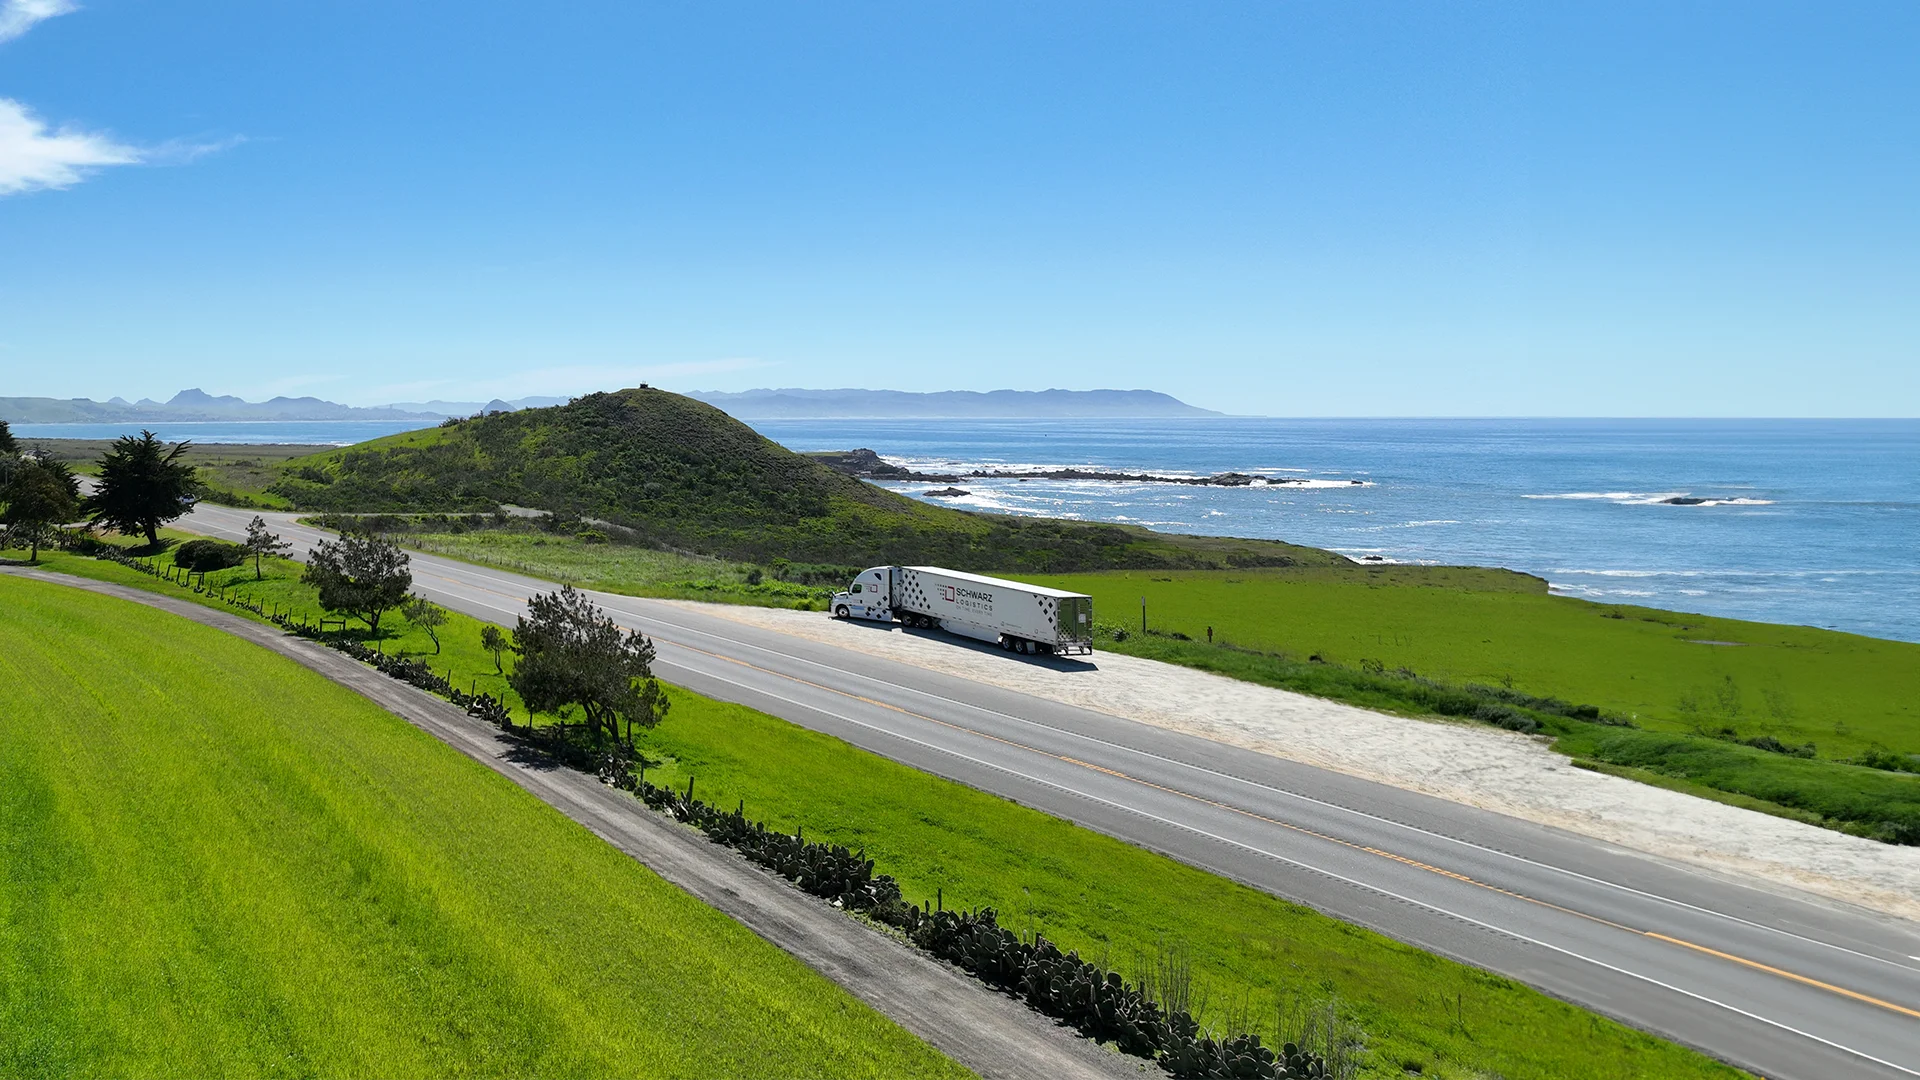 A panoramic view of a coastal highway with a white Schwarz Logistics commercial truck parked along the road. The scene includes lush green hills on the left and a clear blue ocean with rocky shores on the right, under a bright blue sky. In the distance, mountain silhouettes can be seen against the horizon, contributing to the serene and picturesque landscape.